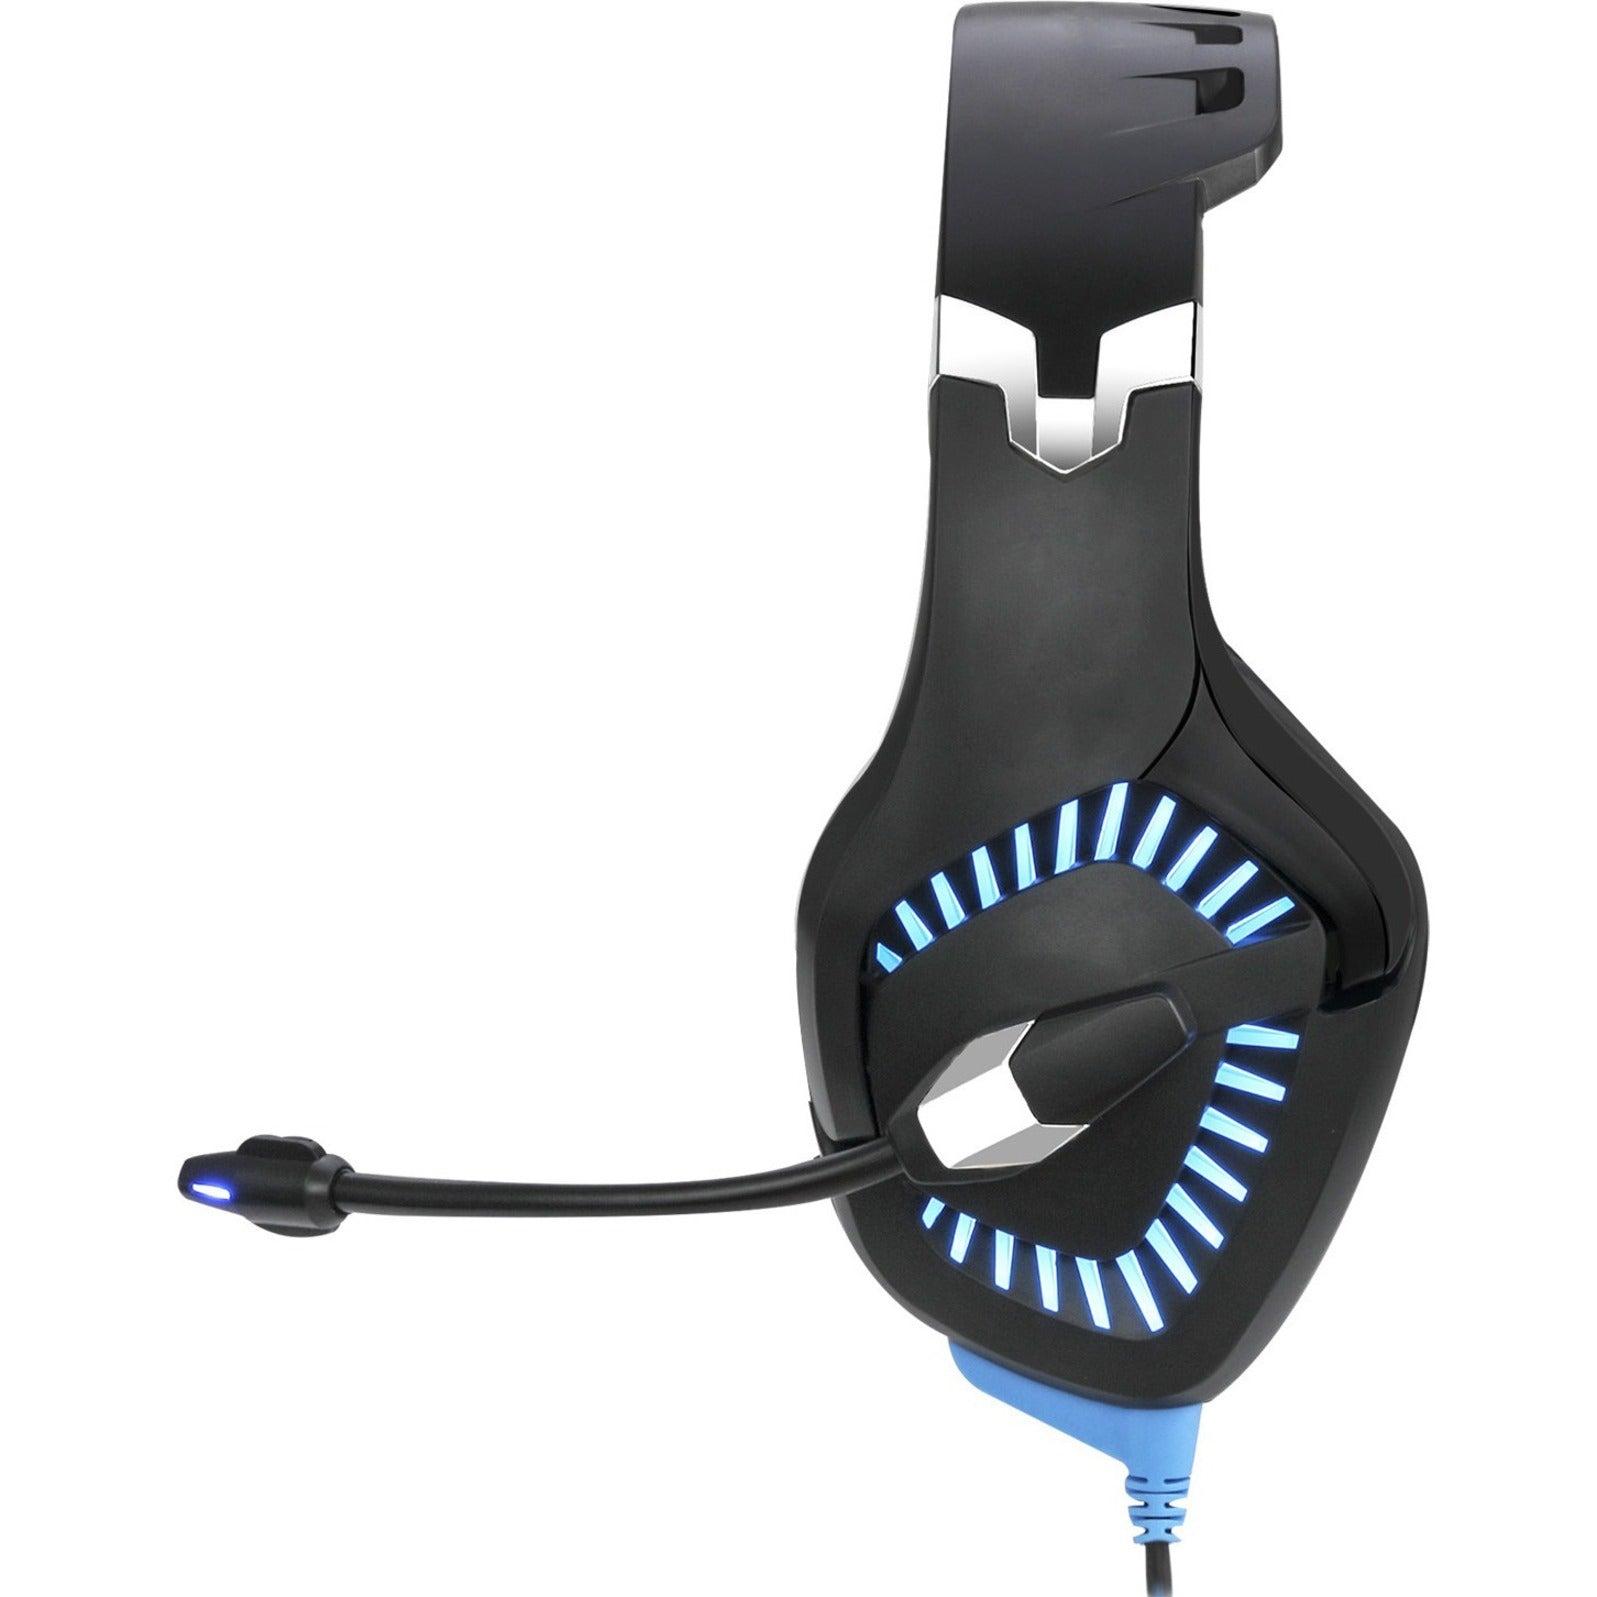 Adesso XTREAM G3 Virtual 7.1 Gaming Headset with Microphone, LED Lighting, Adjustable Headband, 7.1 Surround Sound